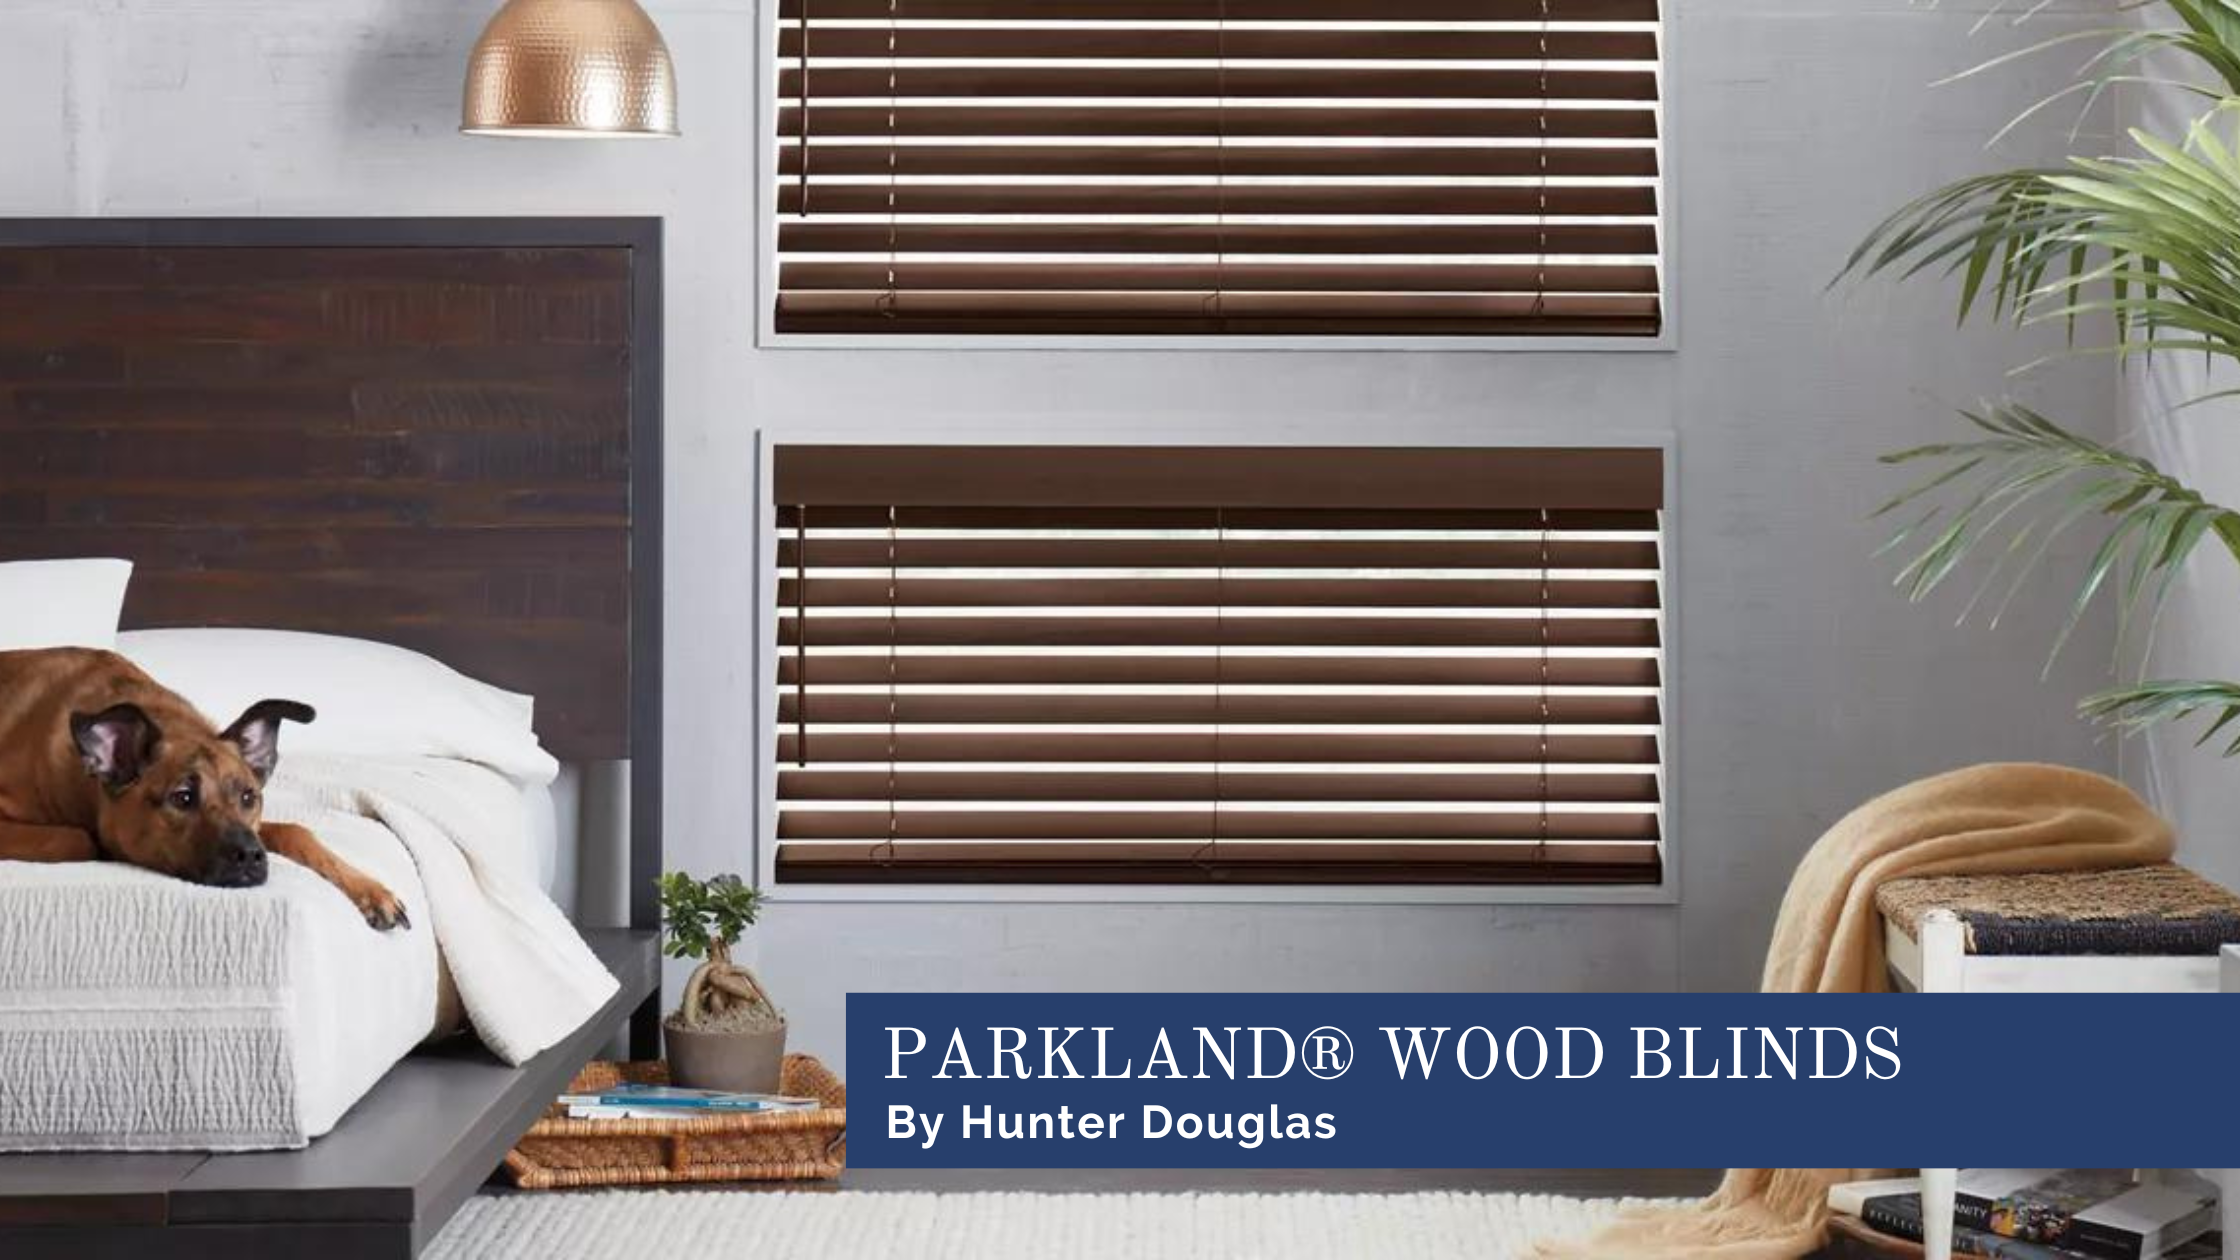 Hunter Douglas Parkland® wood blinds for bedrooms, wooden blinds for windows near Chicago, Illinois (IL) and Midwest